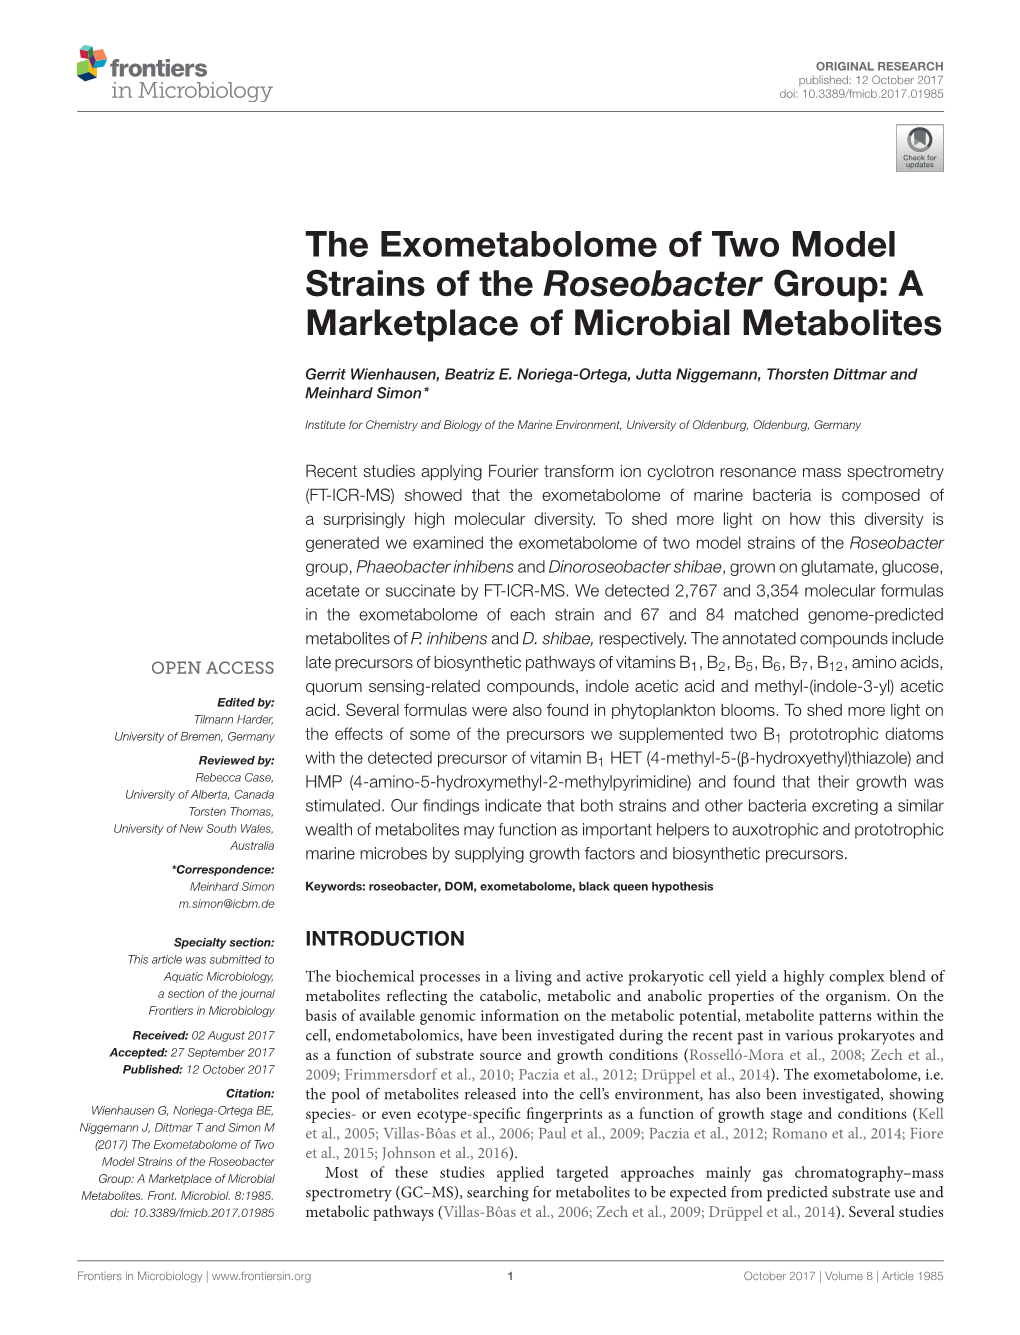 The Exometabolome of Two Model Strains of the Roseobacter Group: a Marketplace of Microbial Metabolites